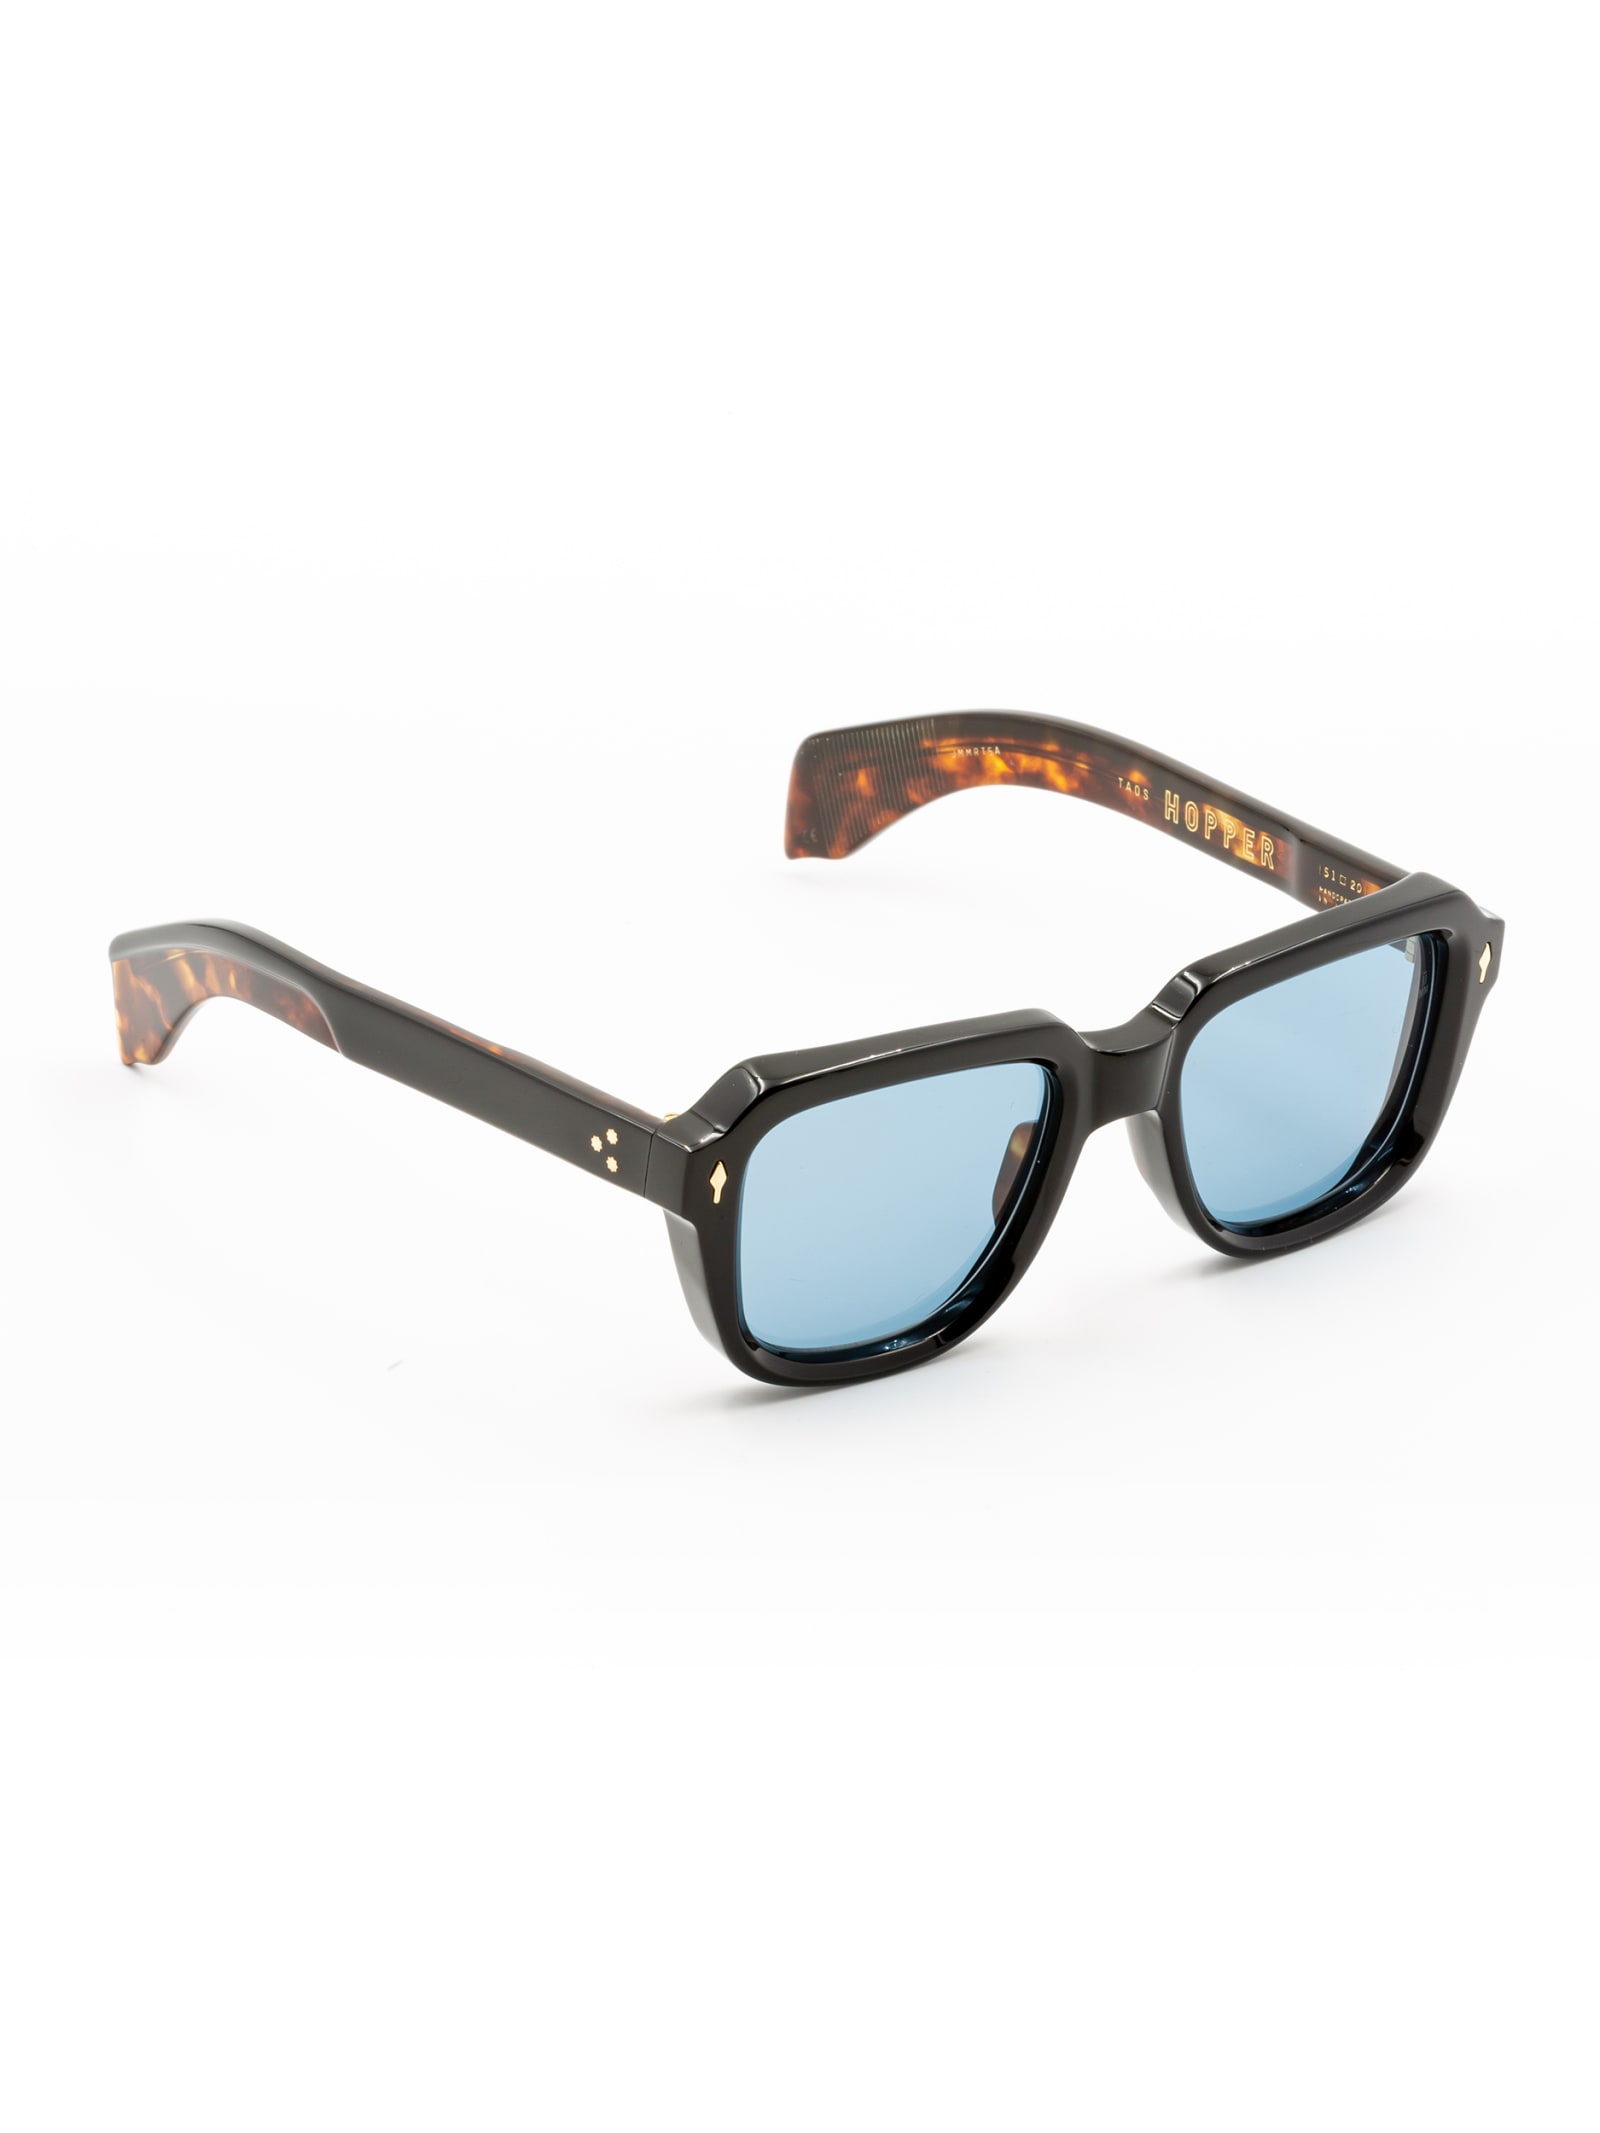 Jacques Marie Mage TAOS JIMMRT/5A Sunglasses